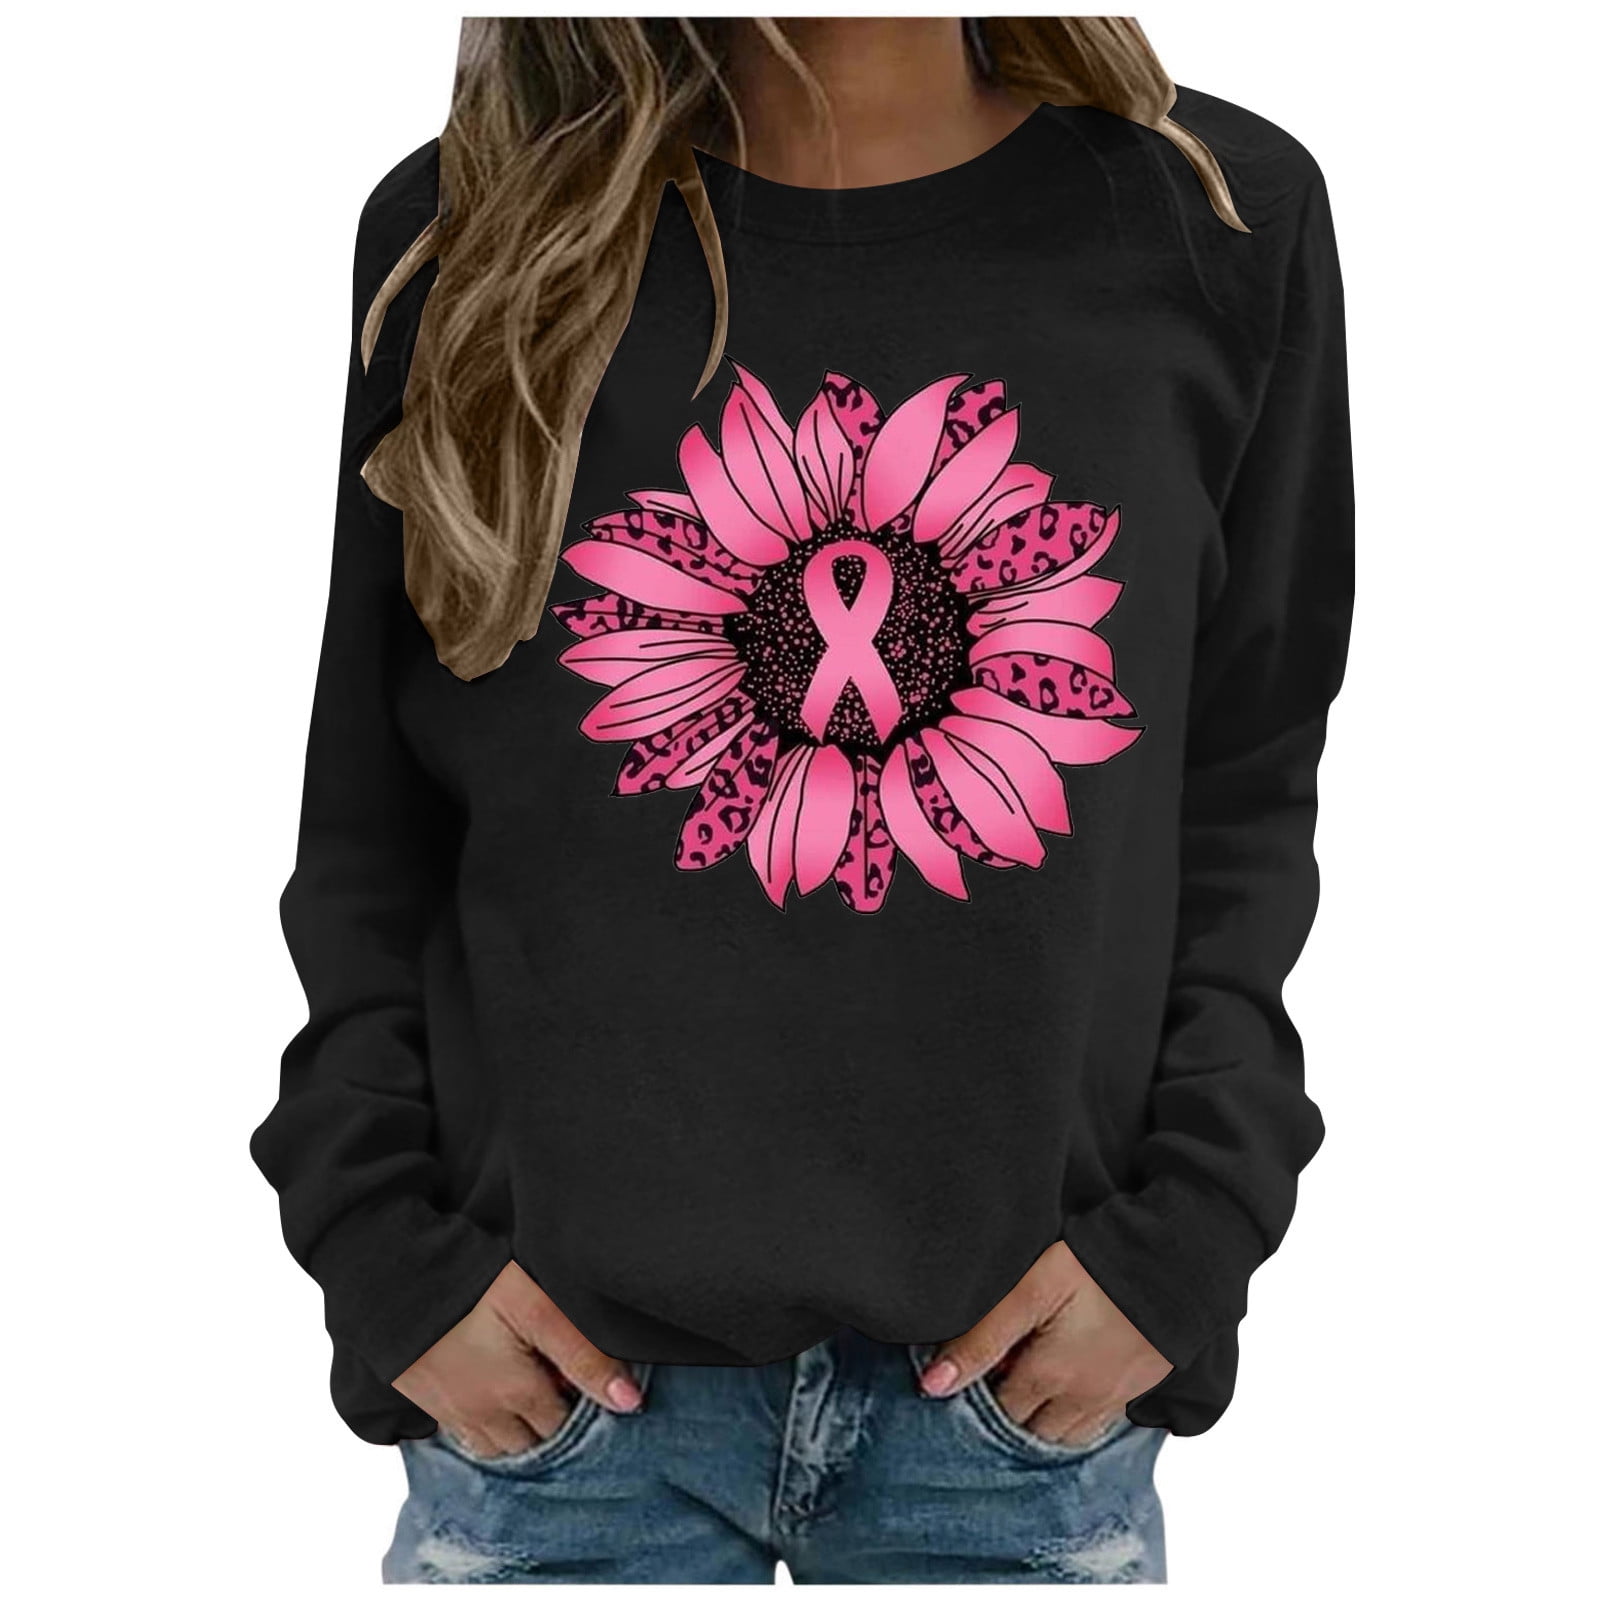 Personalized Breast Cancer Awareness Raglan Cropped T Shirt Ribbon